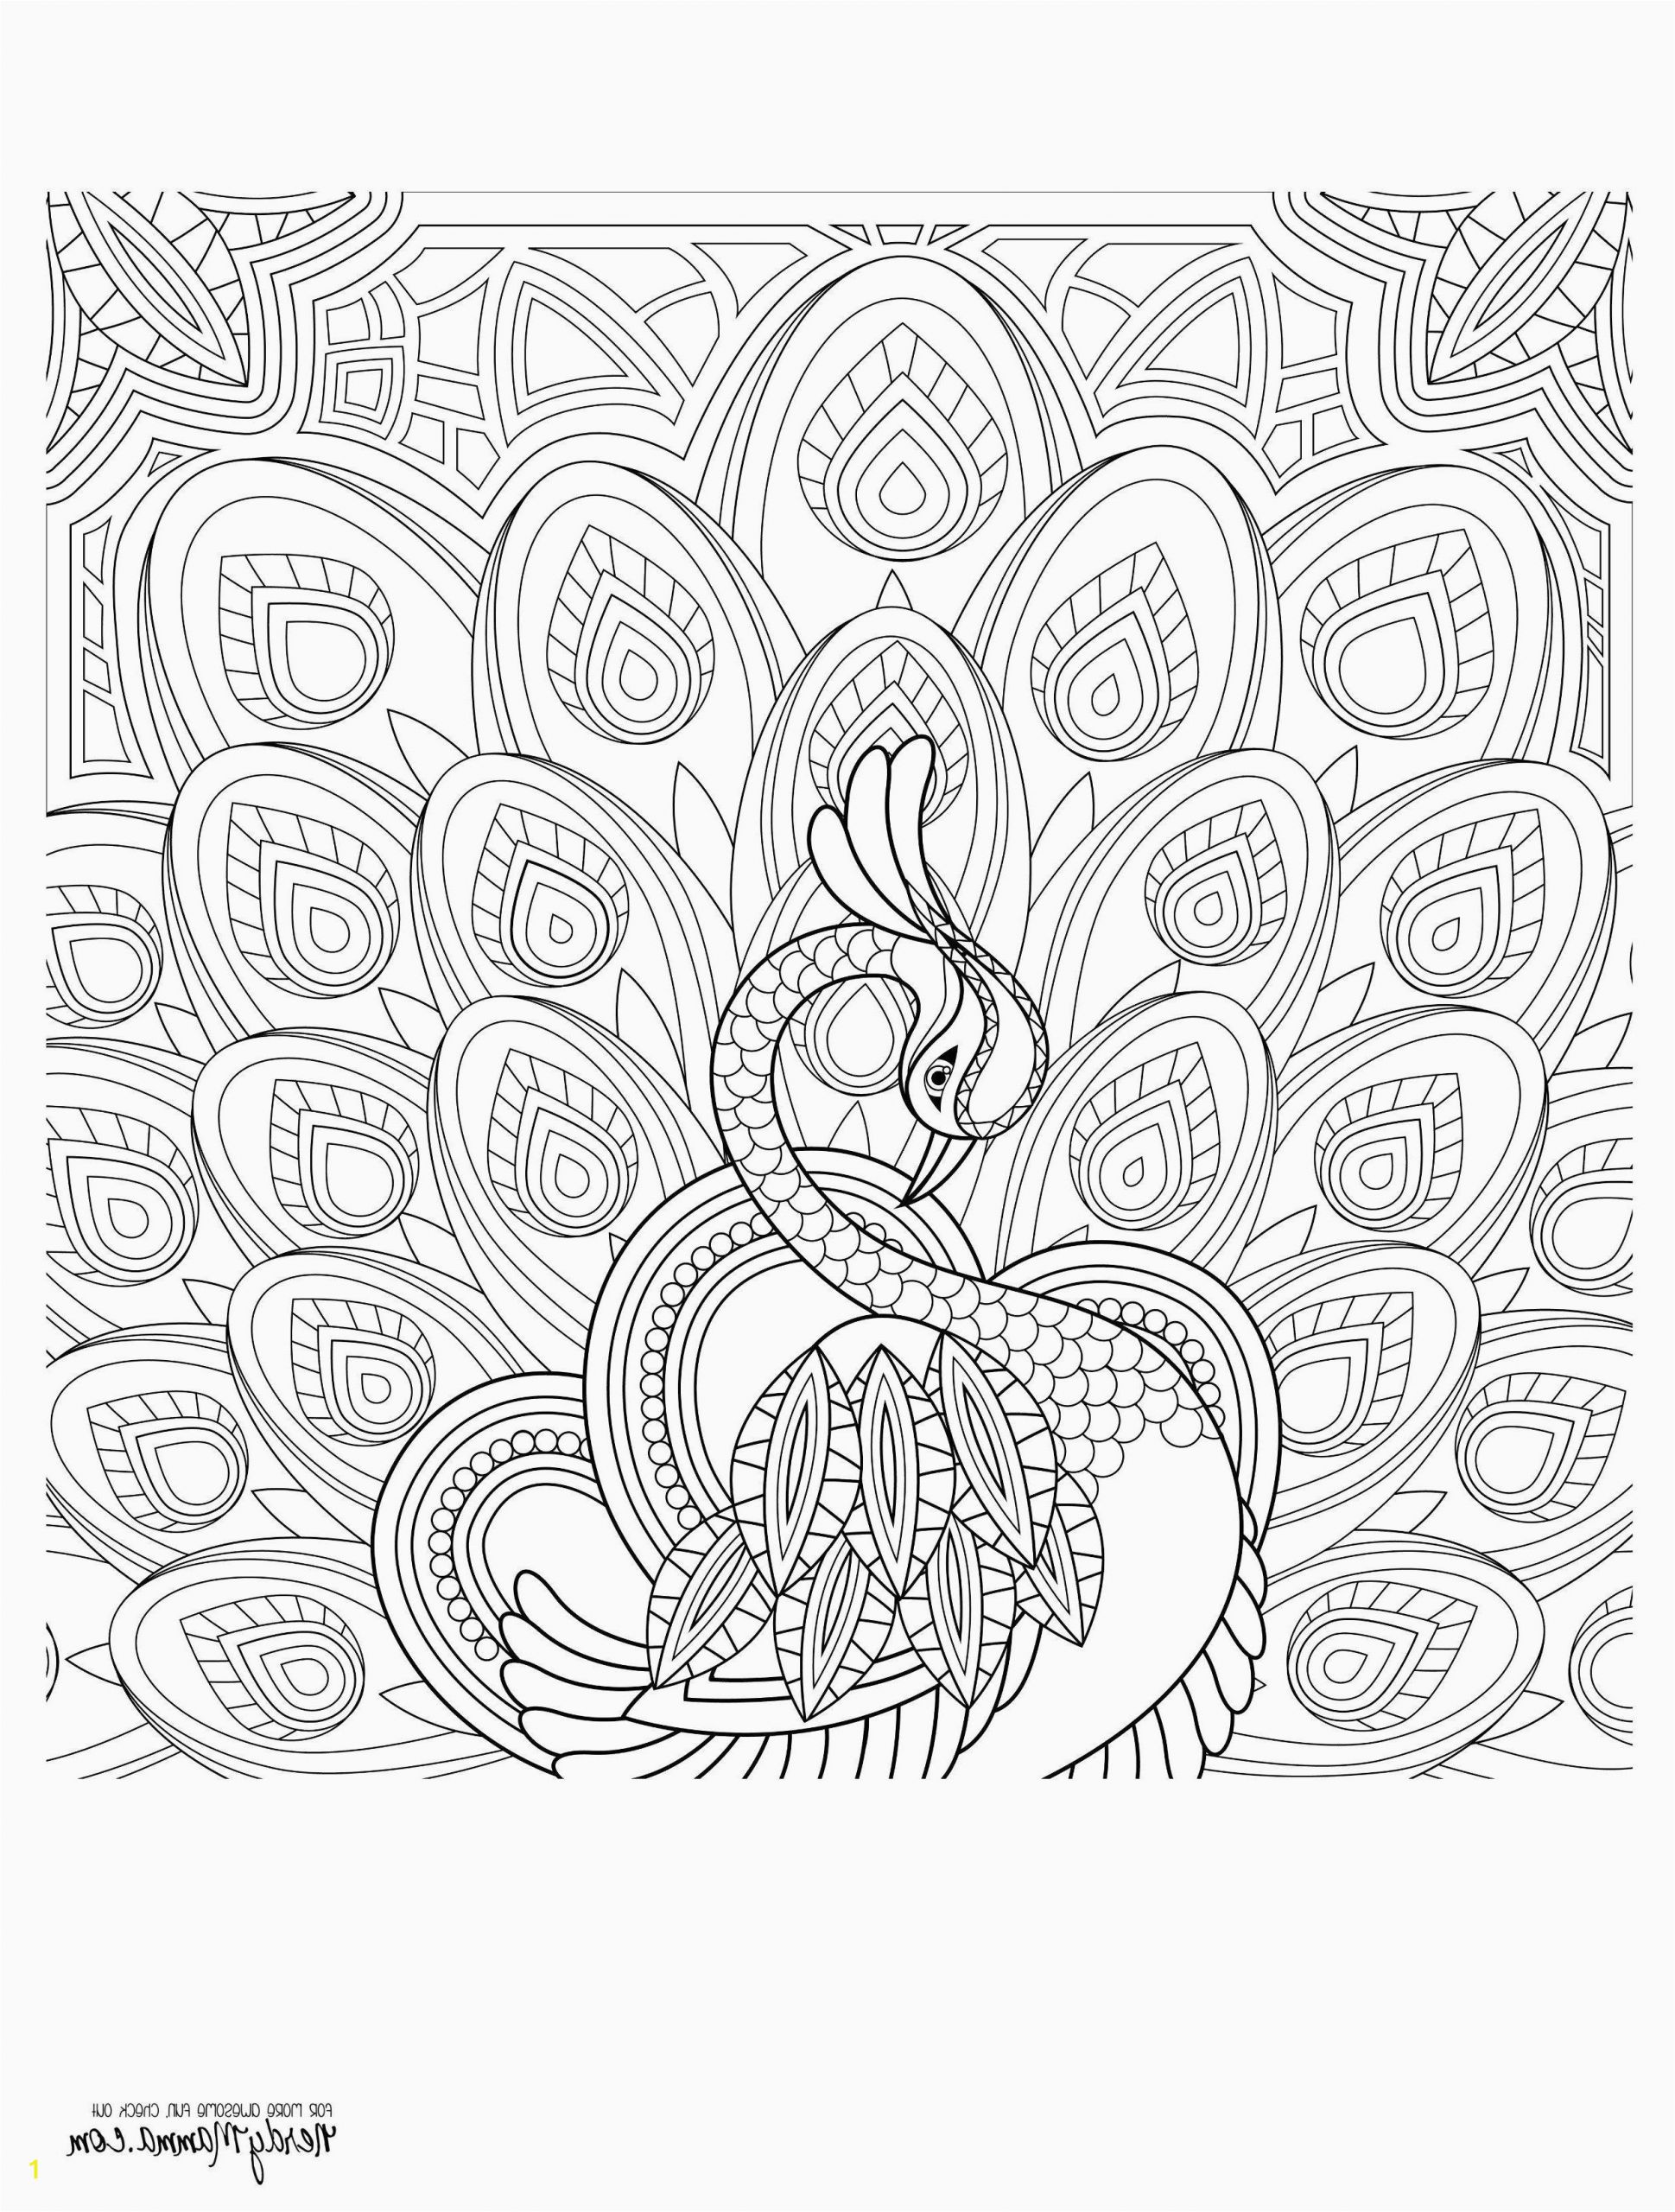 Coloring Pages Free Printable Adults Pin On Coloring Page